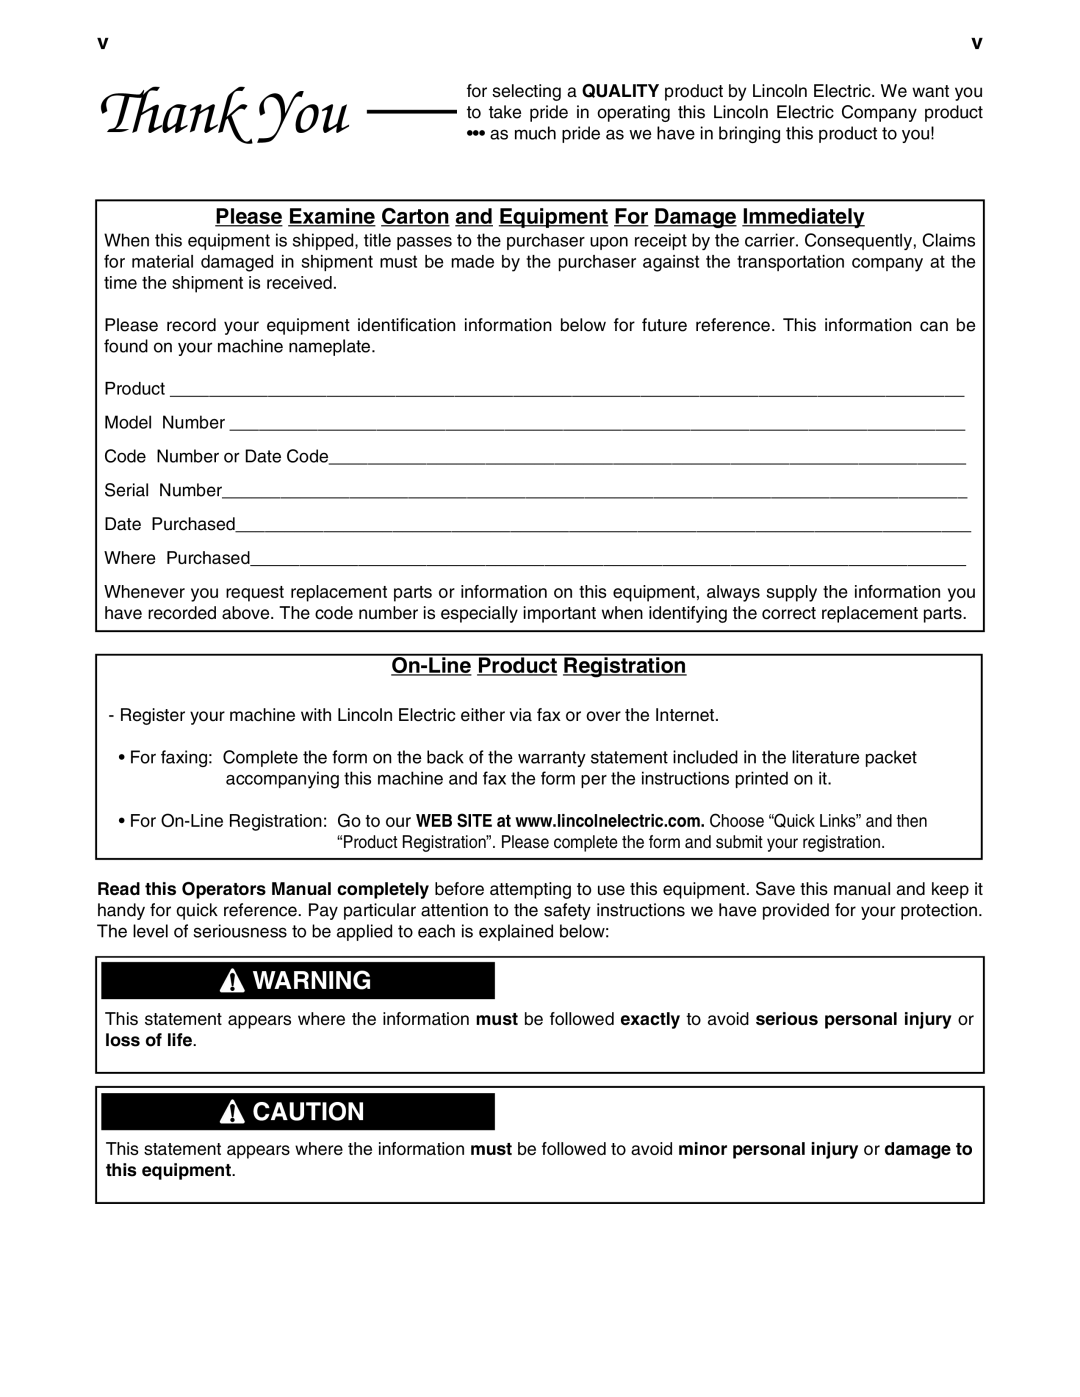 Lincoln Electric IM810 manual Please Examine Carton and Equipment For Damage Immediately, On-Line Product Registration 